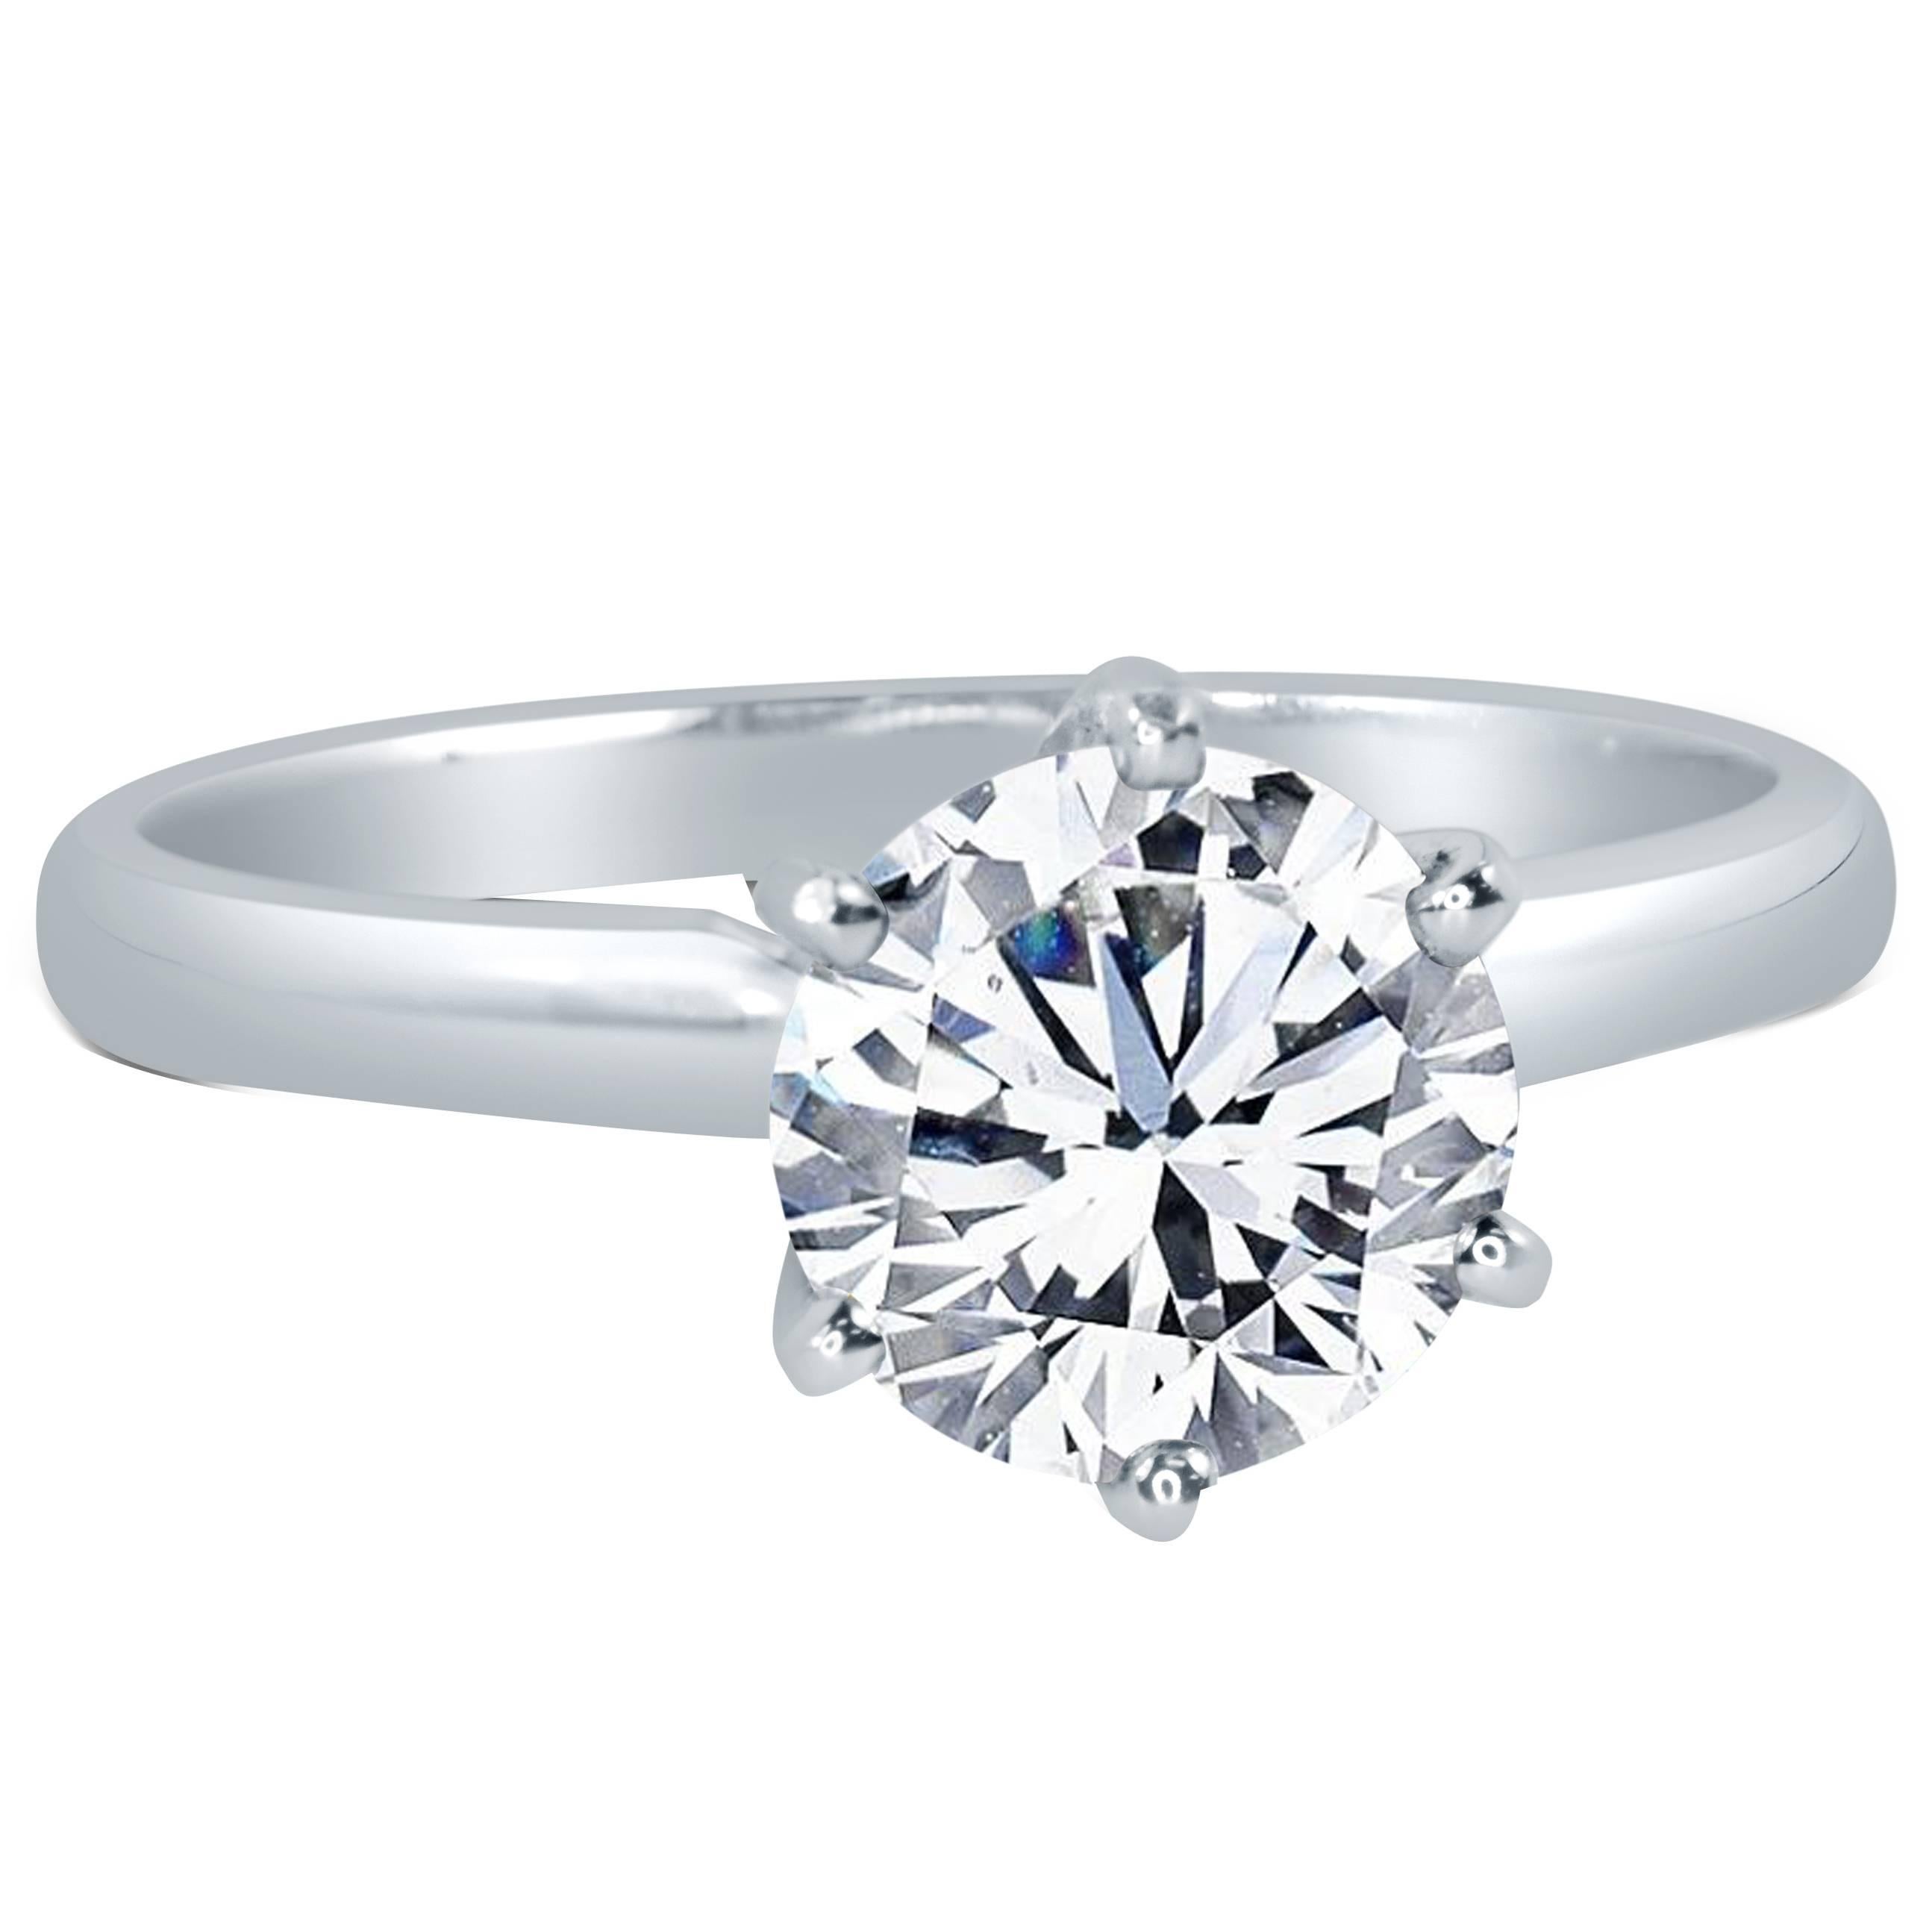 Prince Diamond 0.54 Cts. GIA Cert Diamond Solitaire Engagement Ring